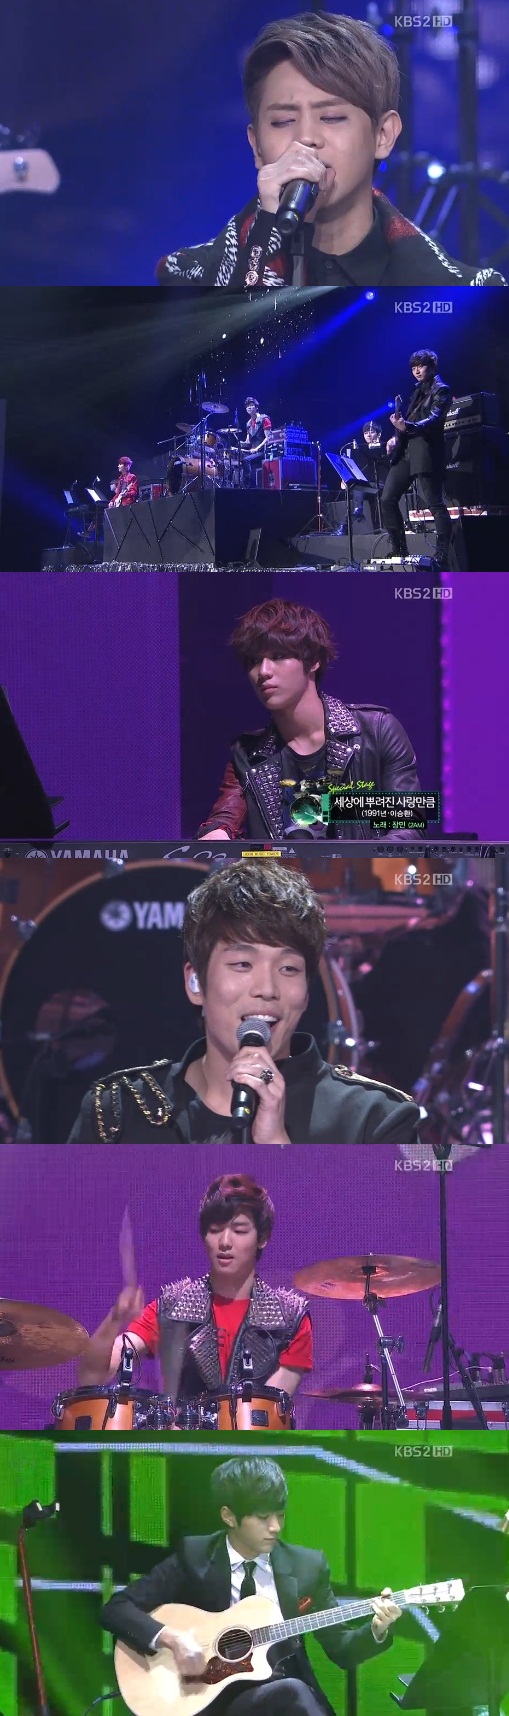 &lsquo;KBS Music Festival&rsquo; achieves highest viewer rating during &lsquo;Idol Super Band&rsquo; stage